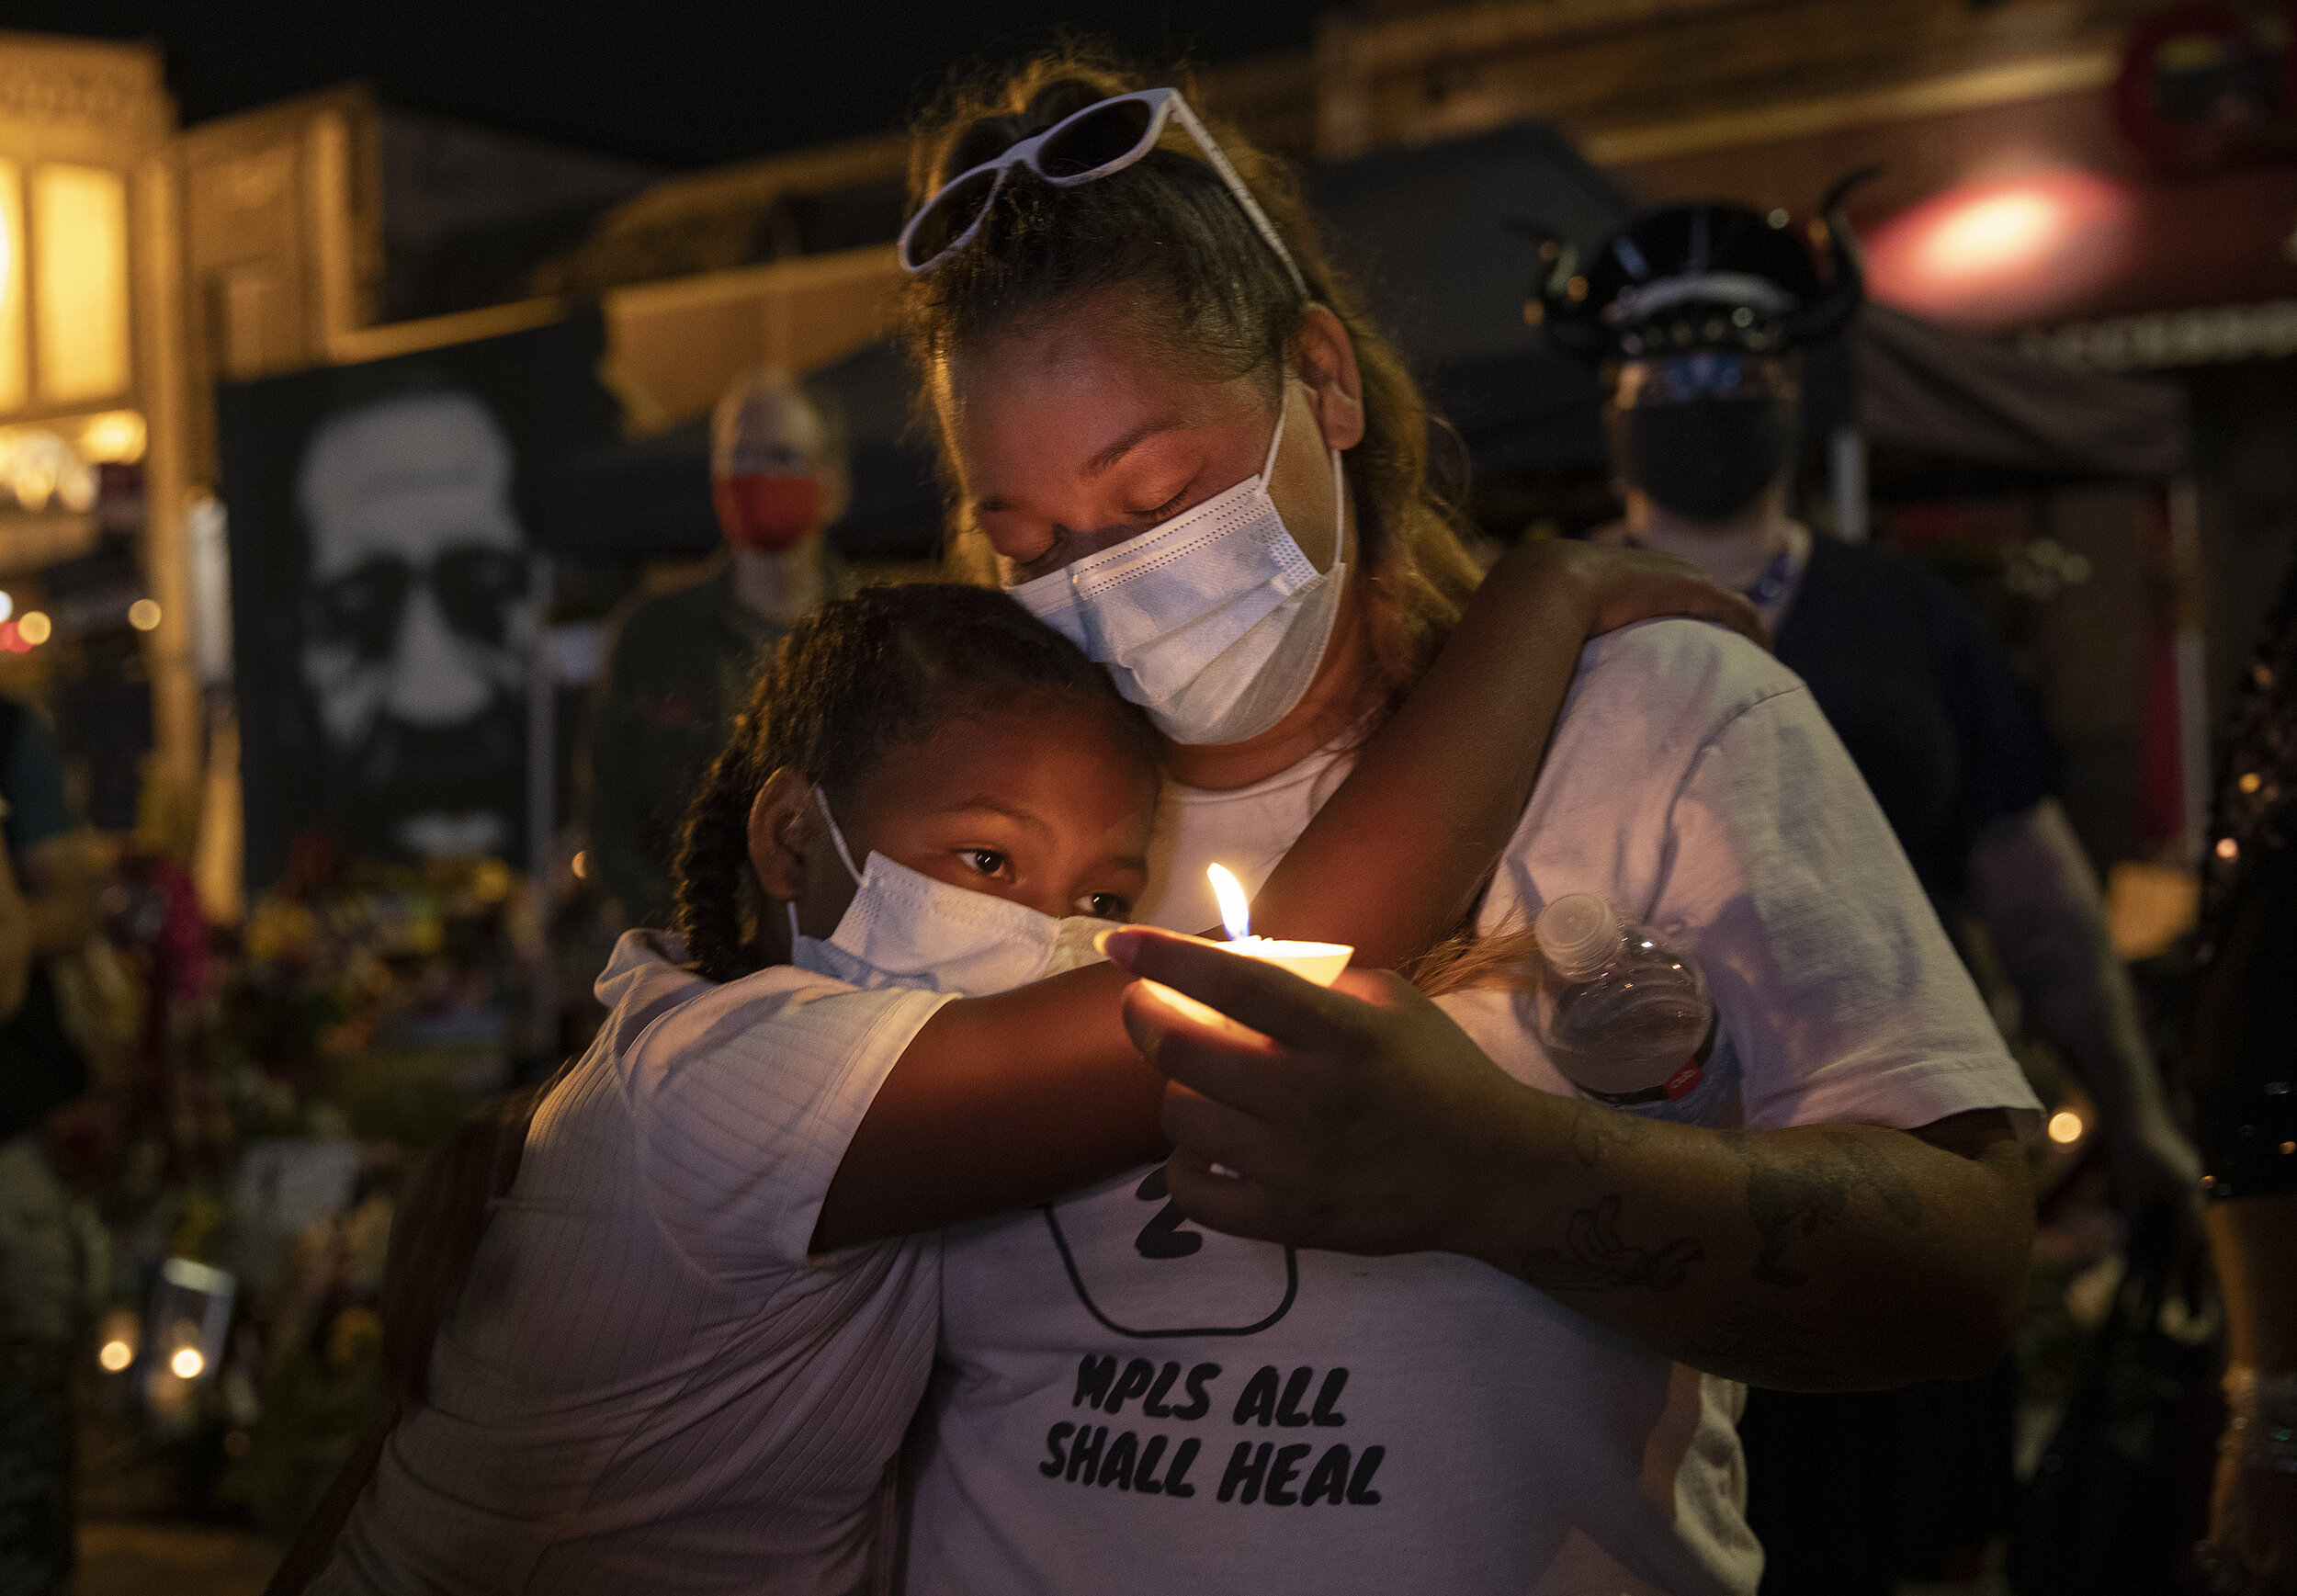  Innocynce Johnson, 11, and Kia Bible embrace at George Floyd Square during a multi-faith prayer candlelight vigil to honor Jacob Blake and Black lives. 